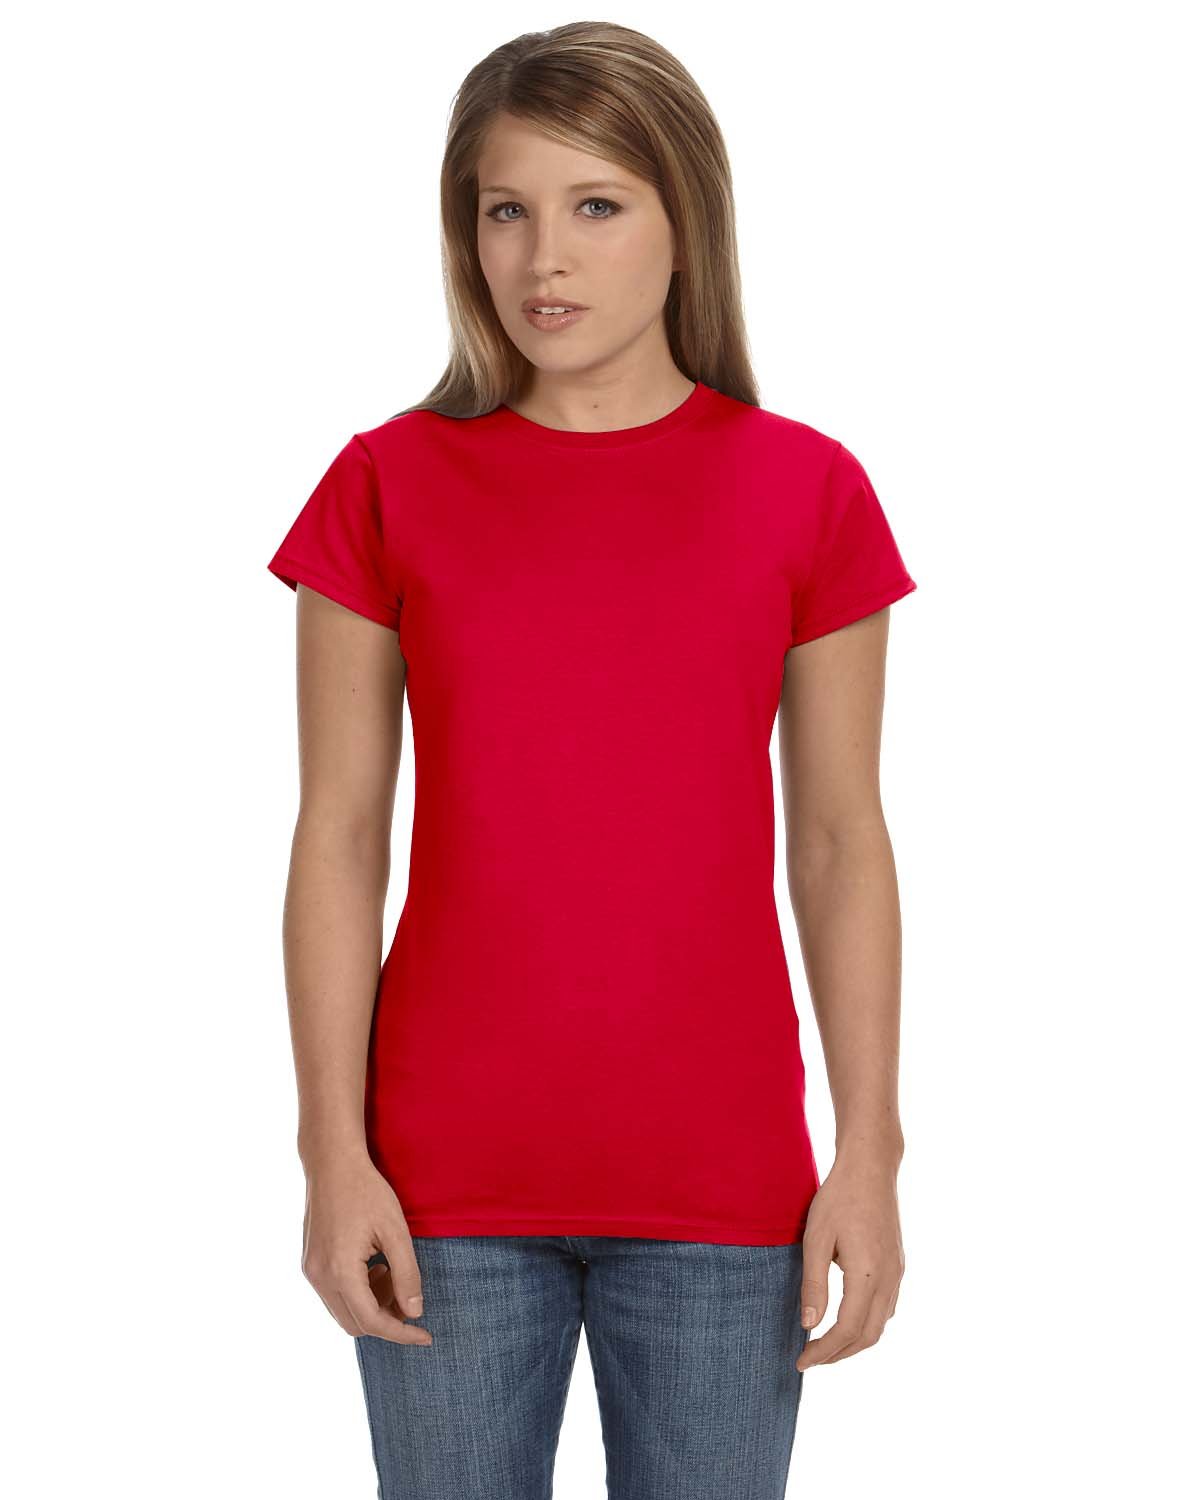 Gildan Ladies' Softstyle® Fitted T-Shirt RED 